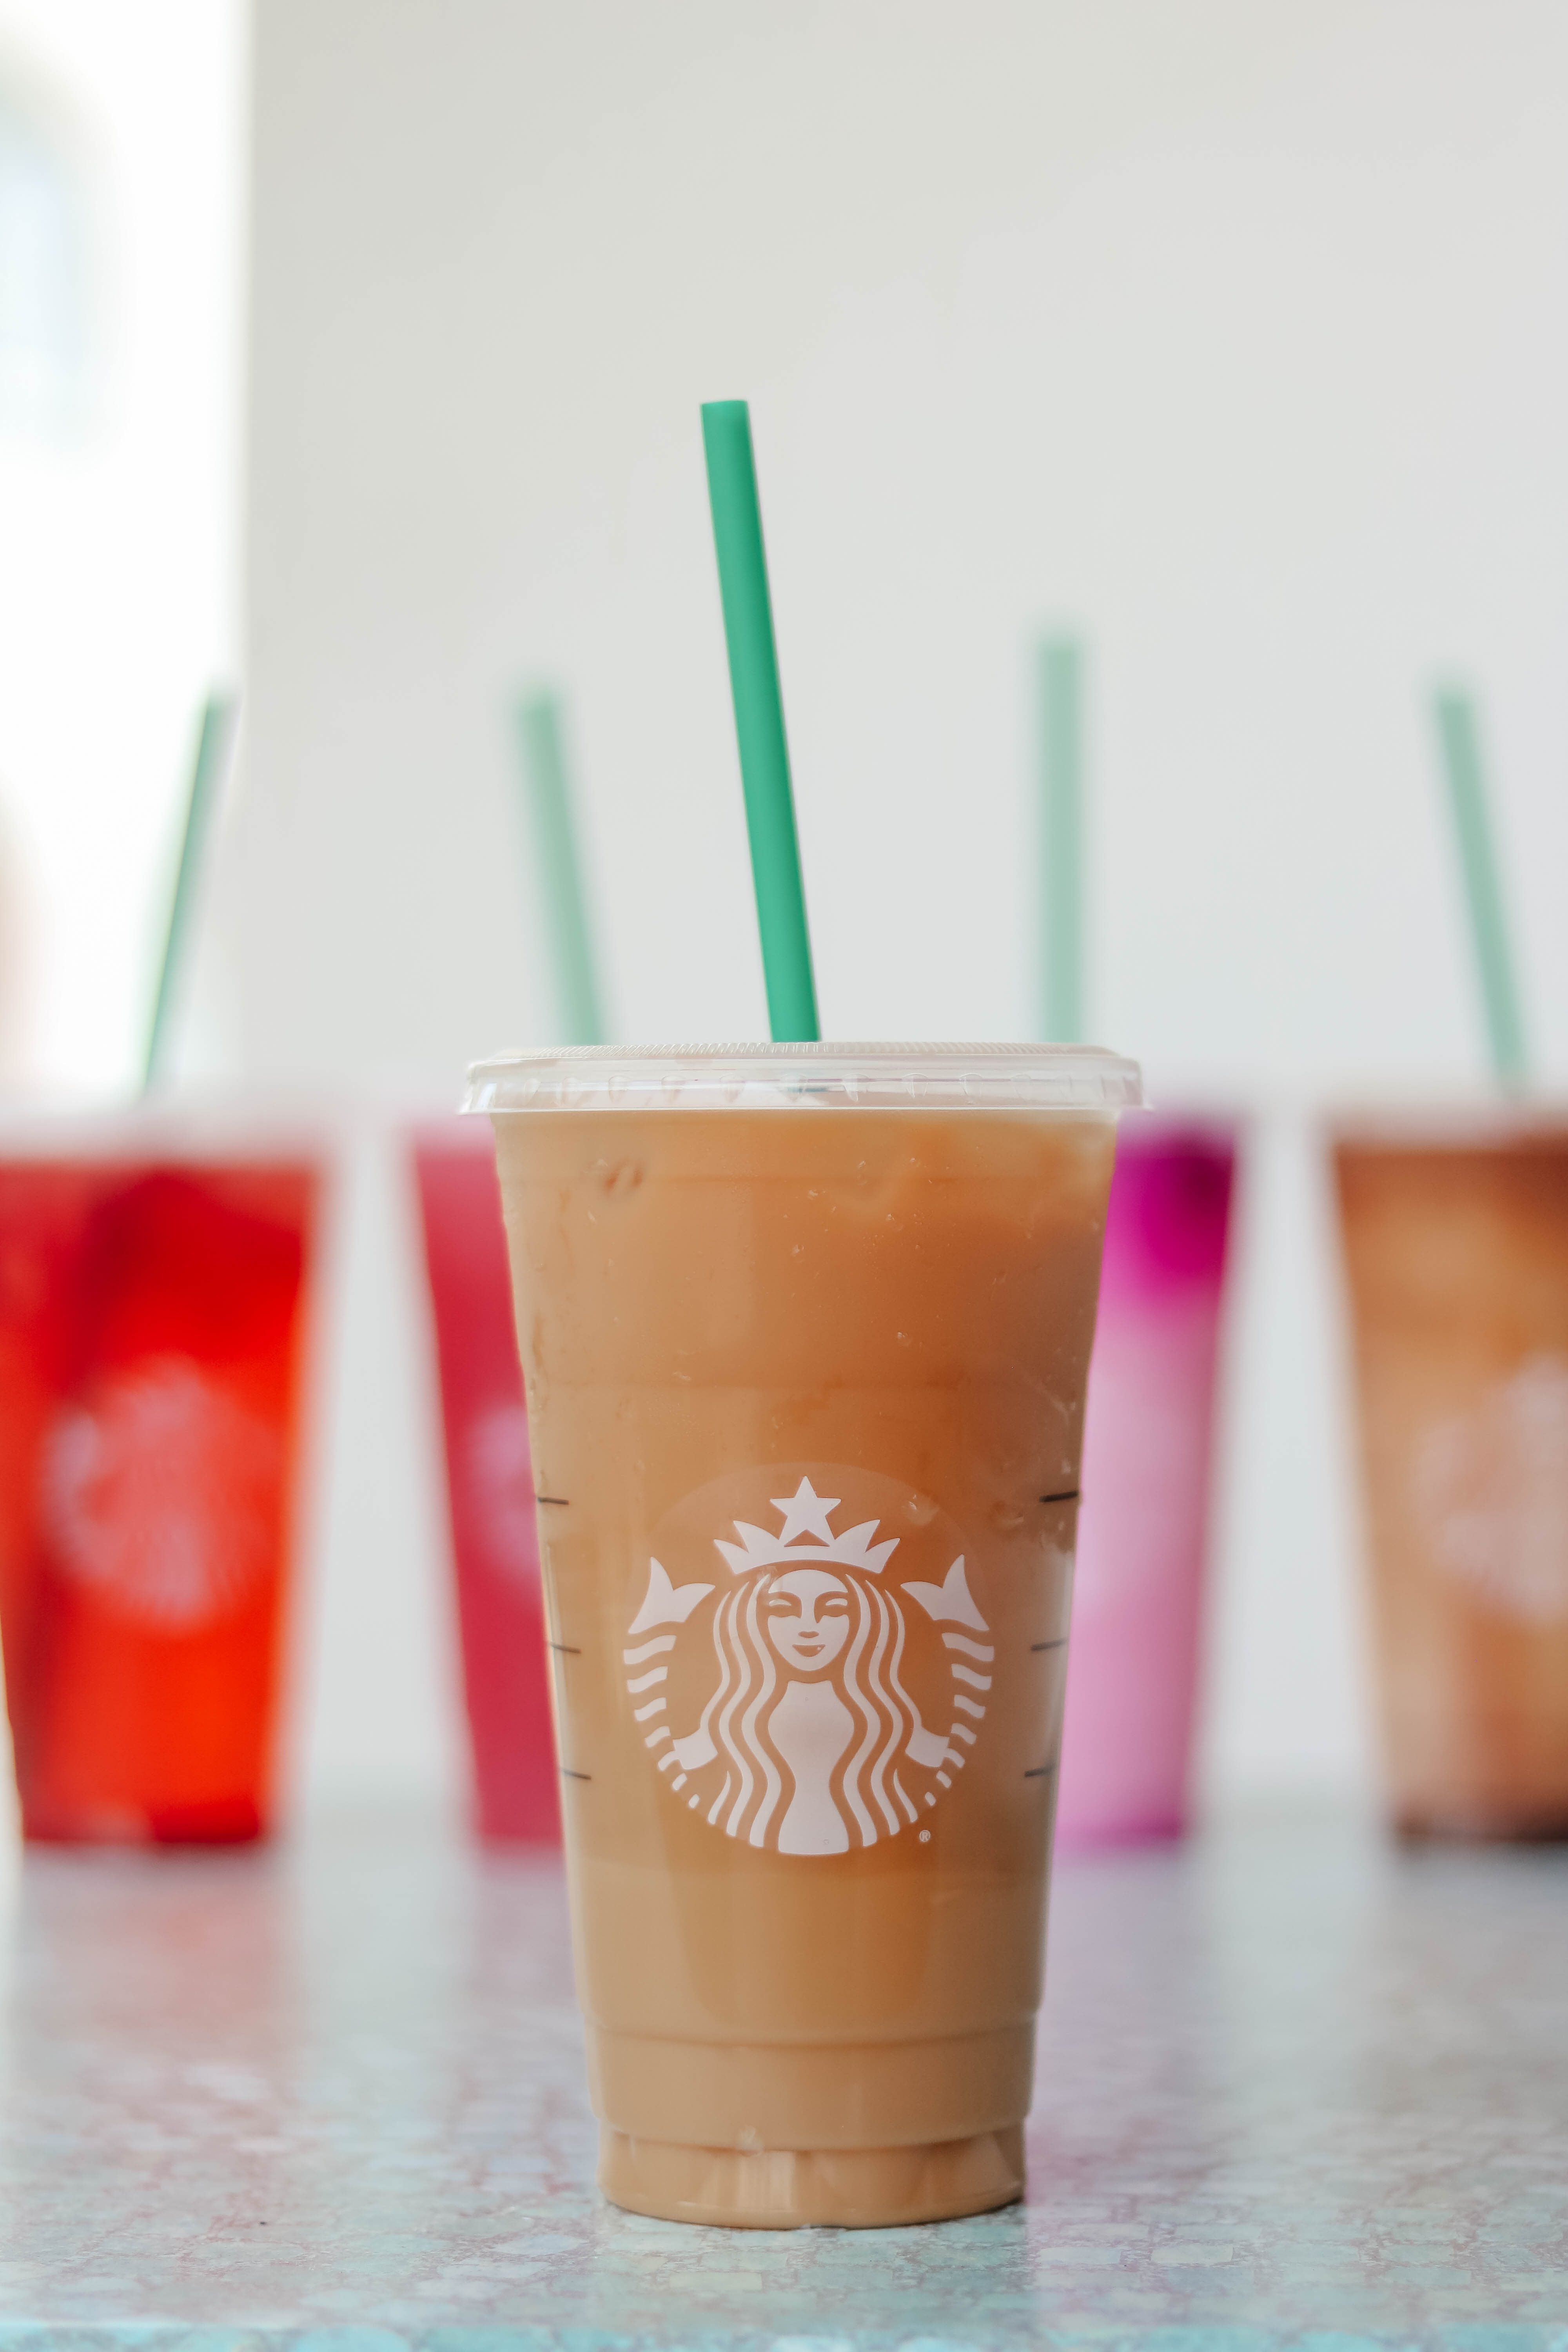 5 Refreshing Starbucks Drinks - Yummy drinks for summer, and how to specifically ask for them at Starbucks! on Coming Up Roses